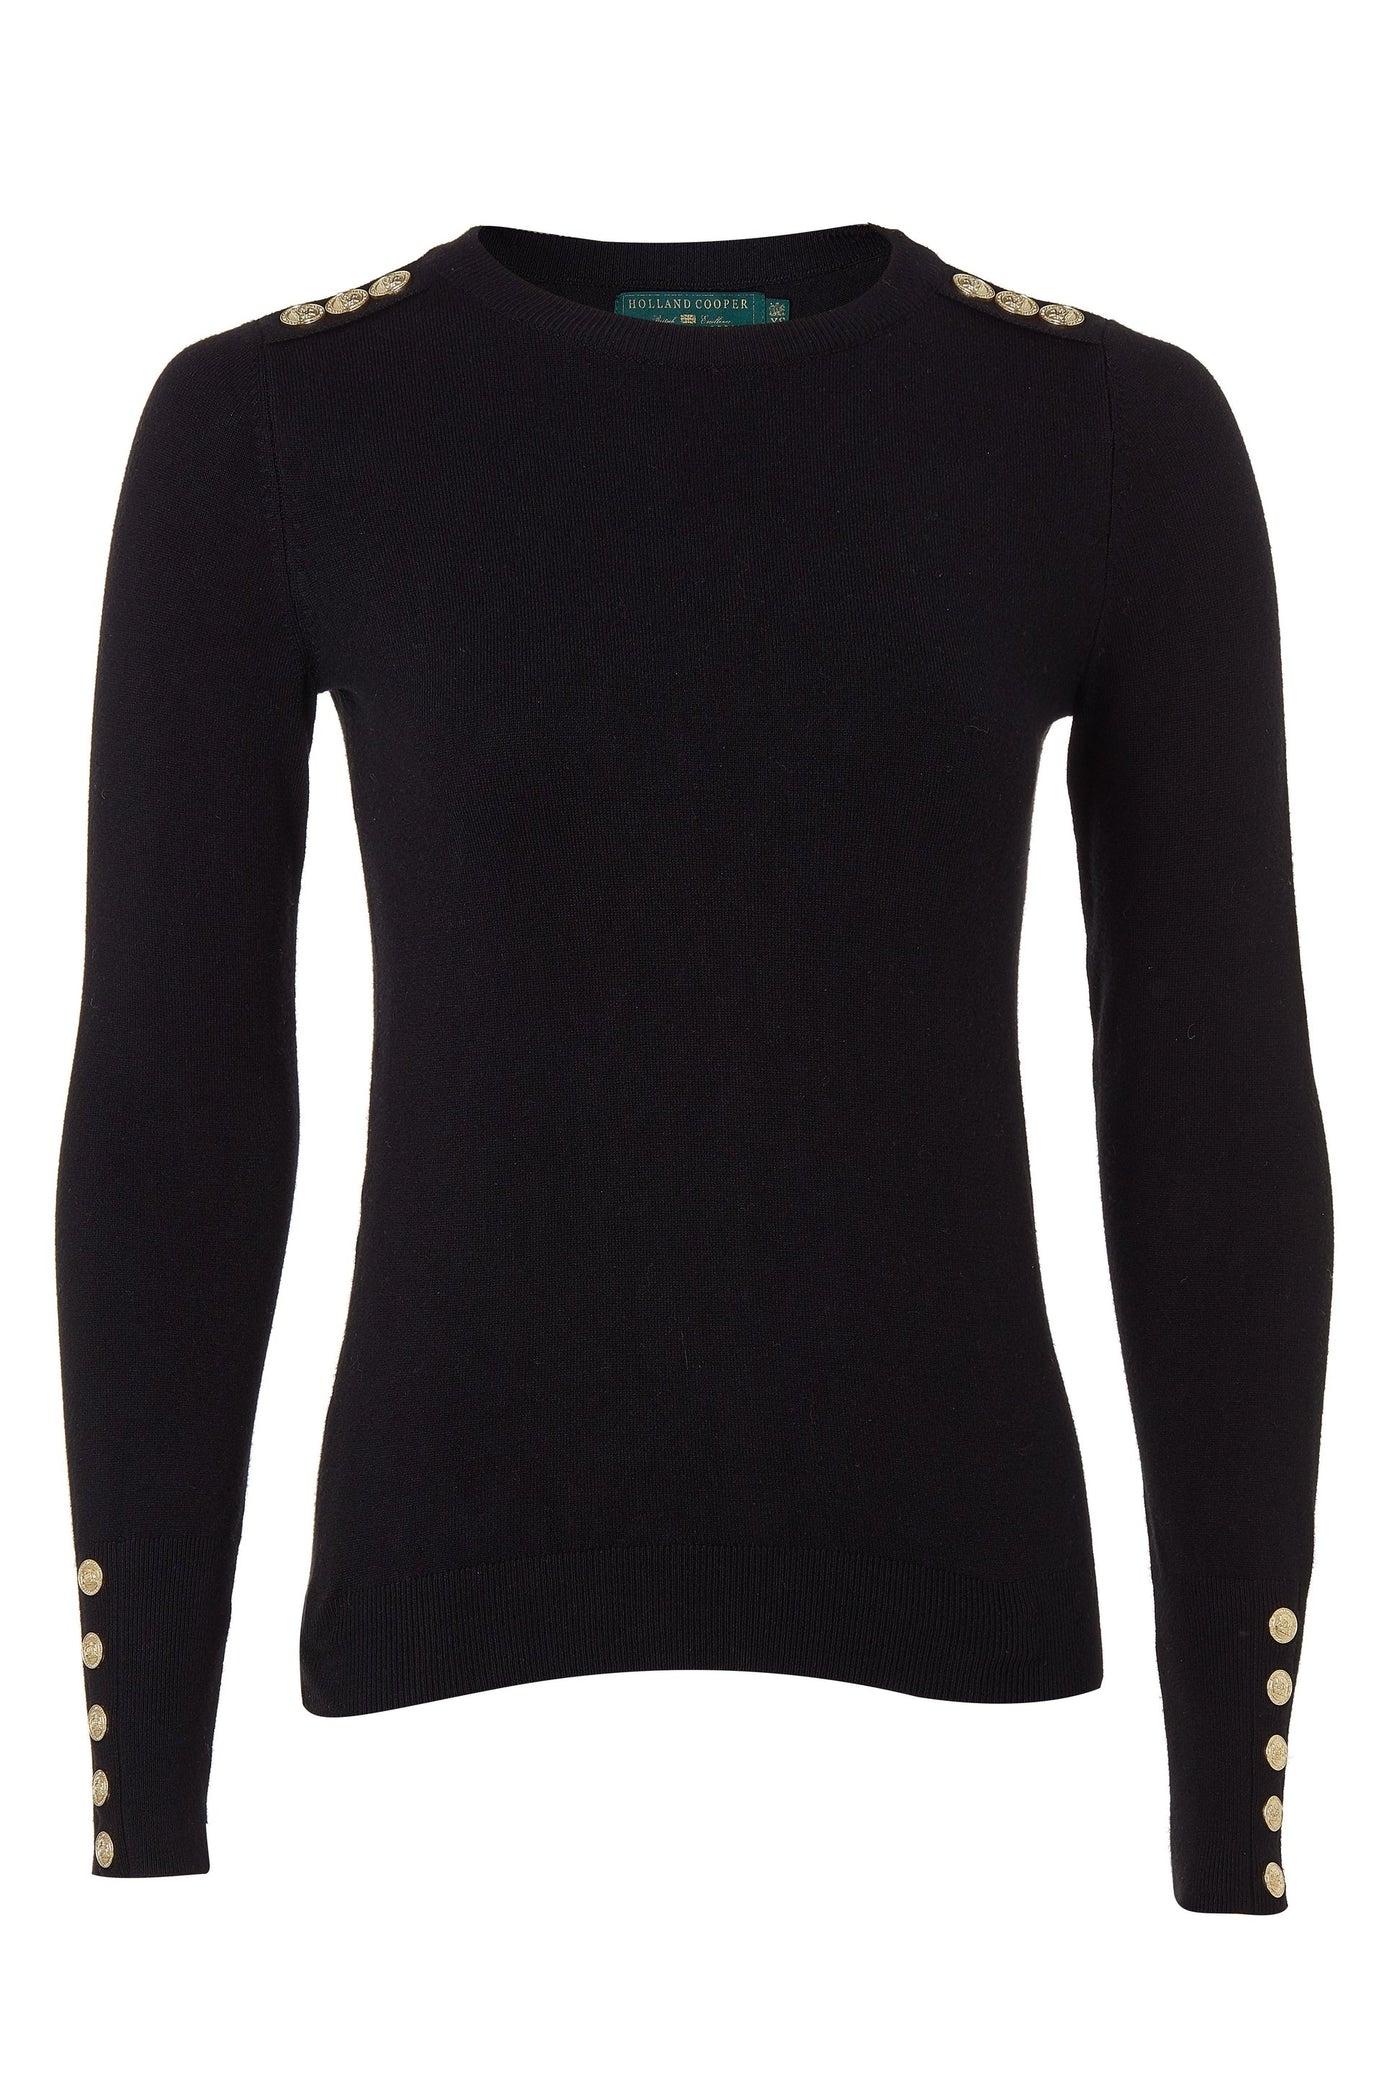 Holland Cooper Buttoned Knit Crew Neck in Black Front